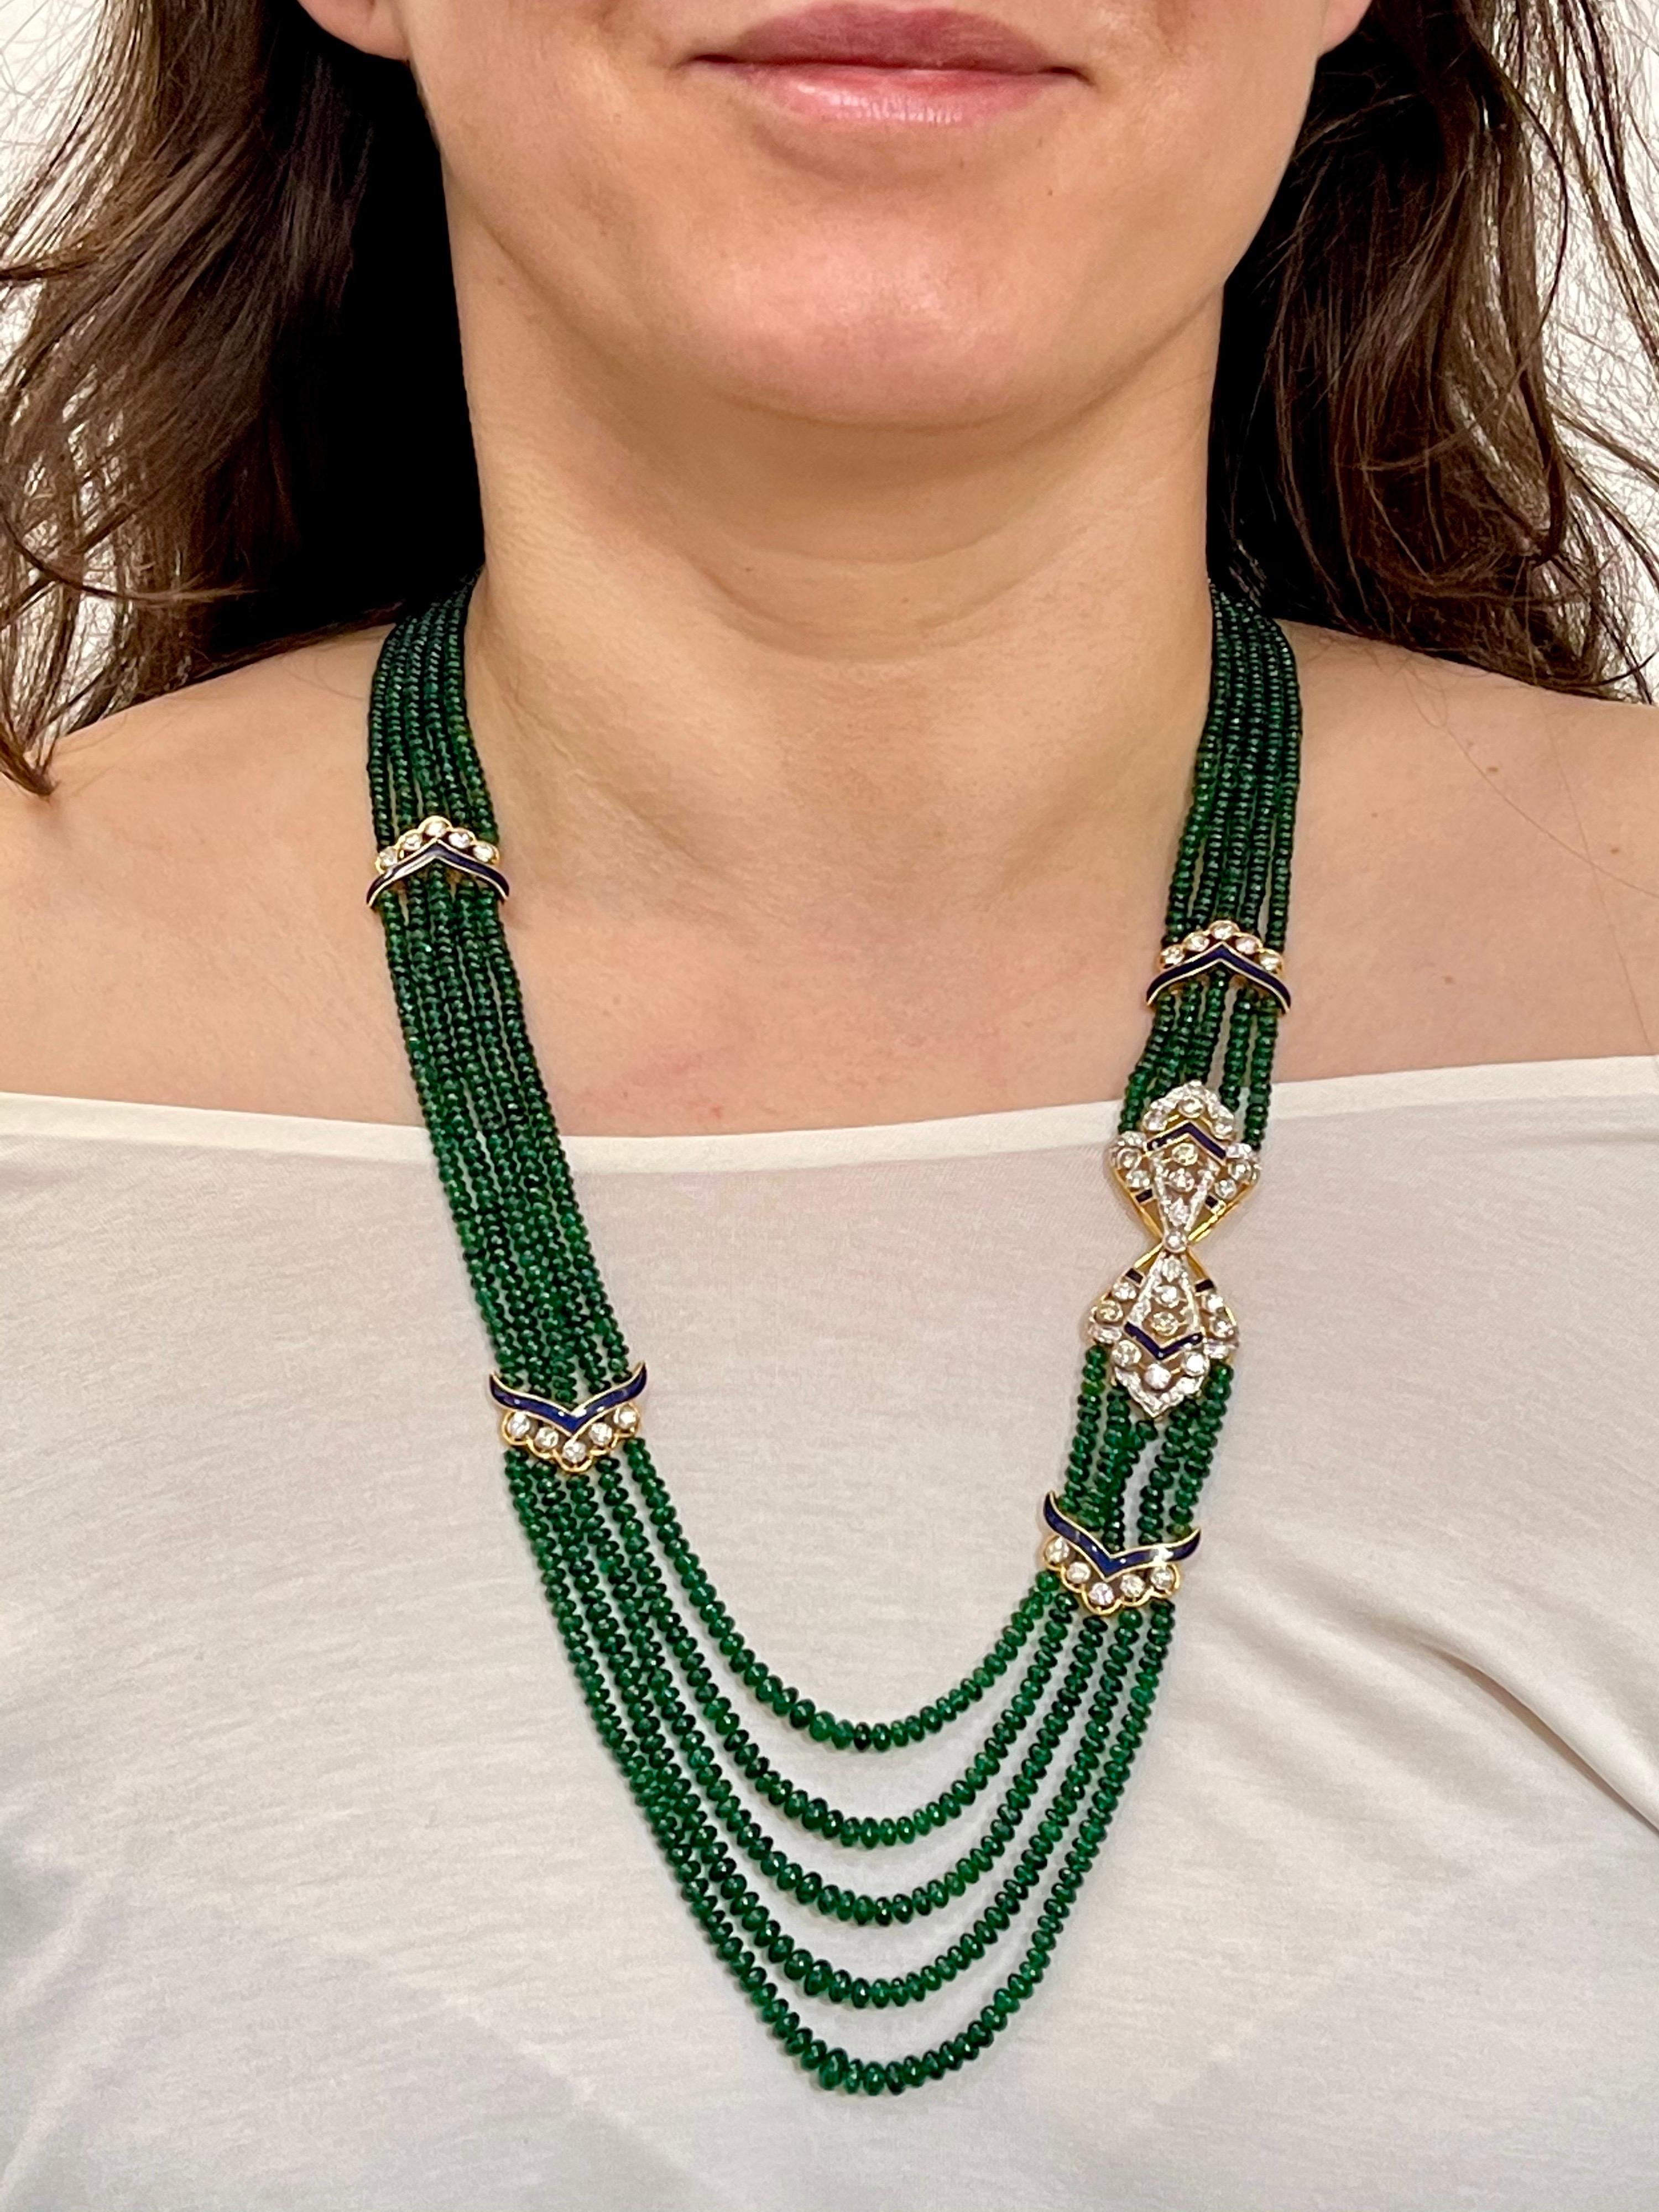 300 Carat 5-Strand Emerald Necklace with 4.8 Carat Diamond & Enamel in 14k Gold For Sale 5